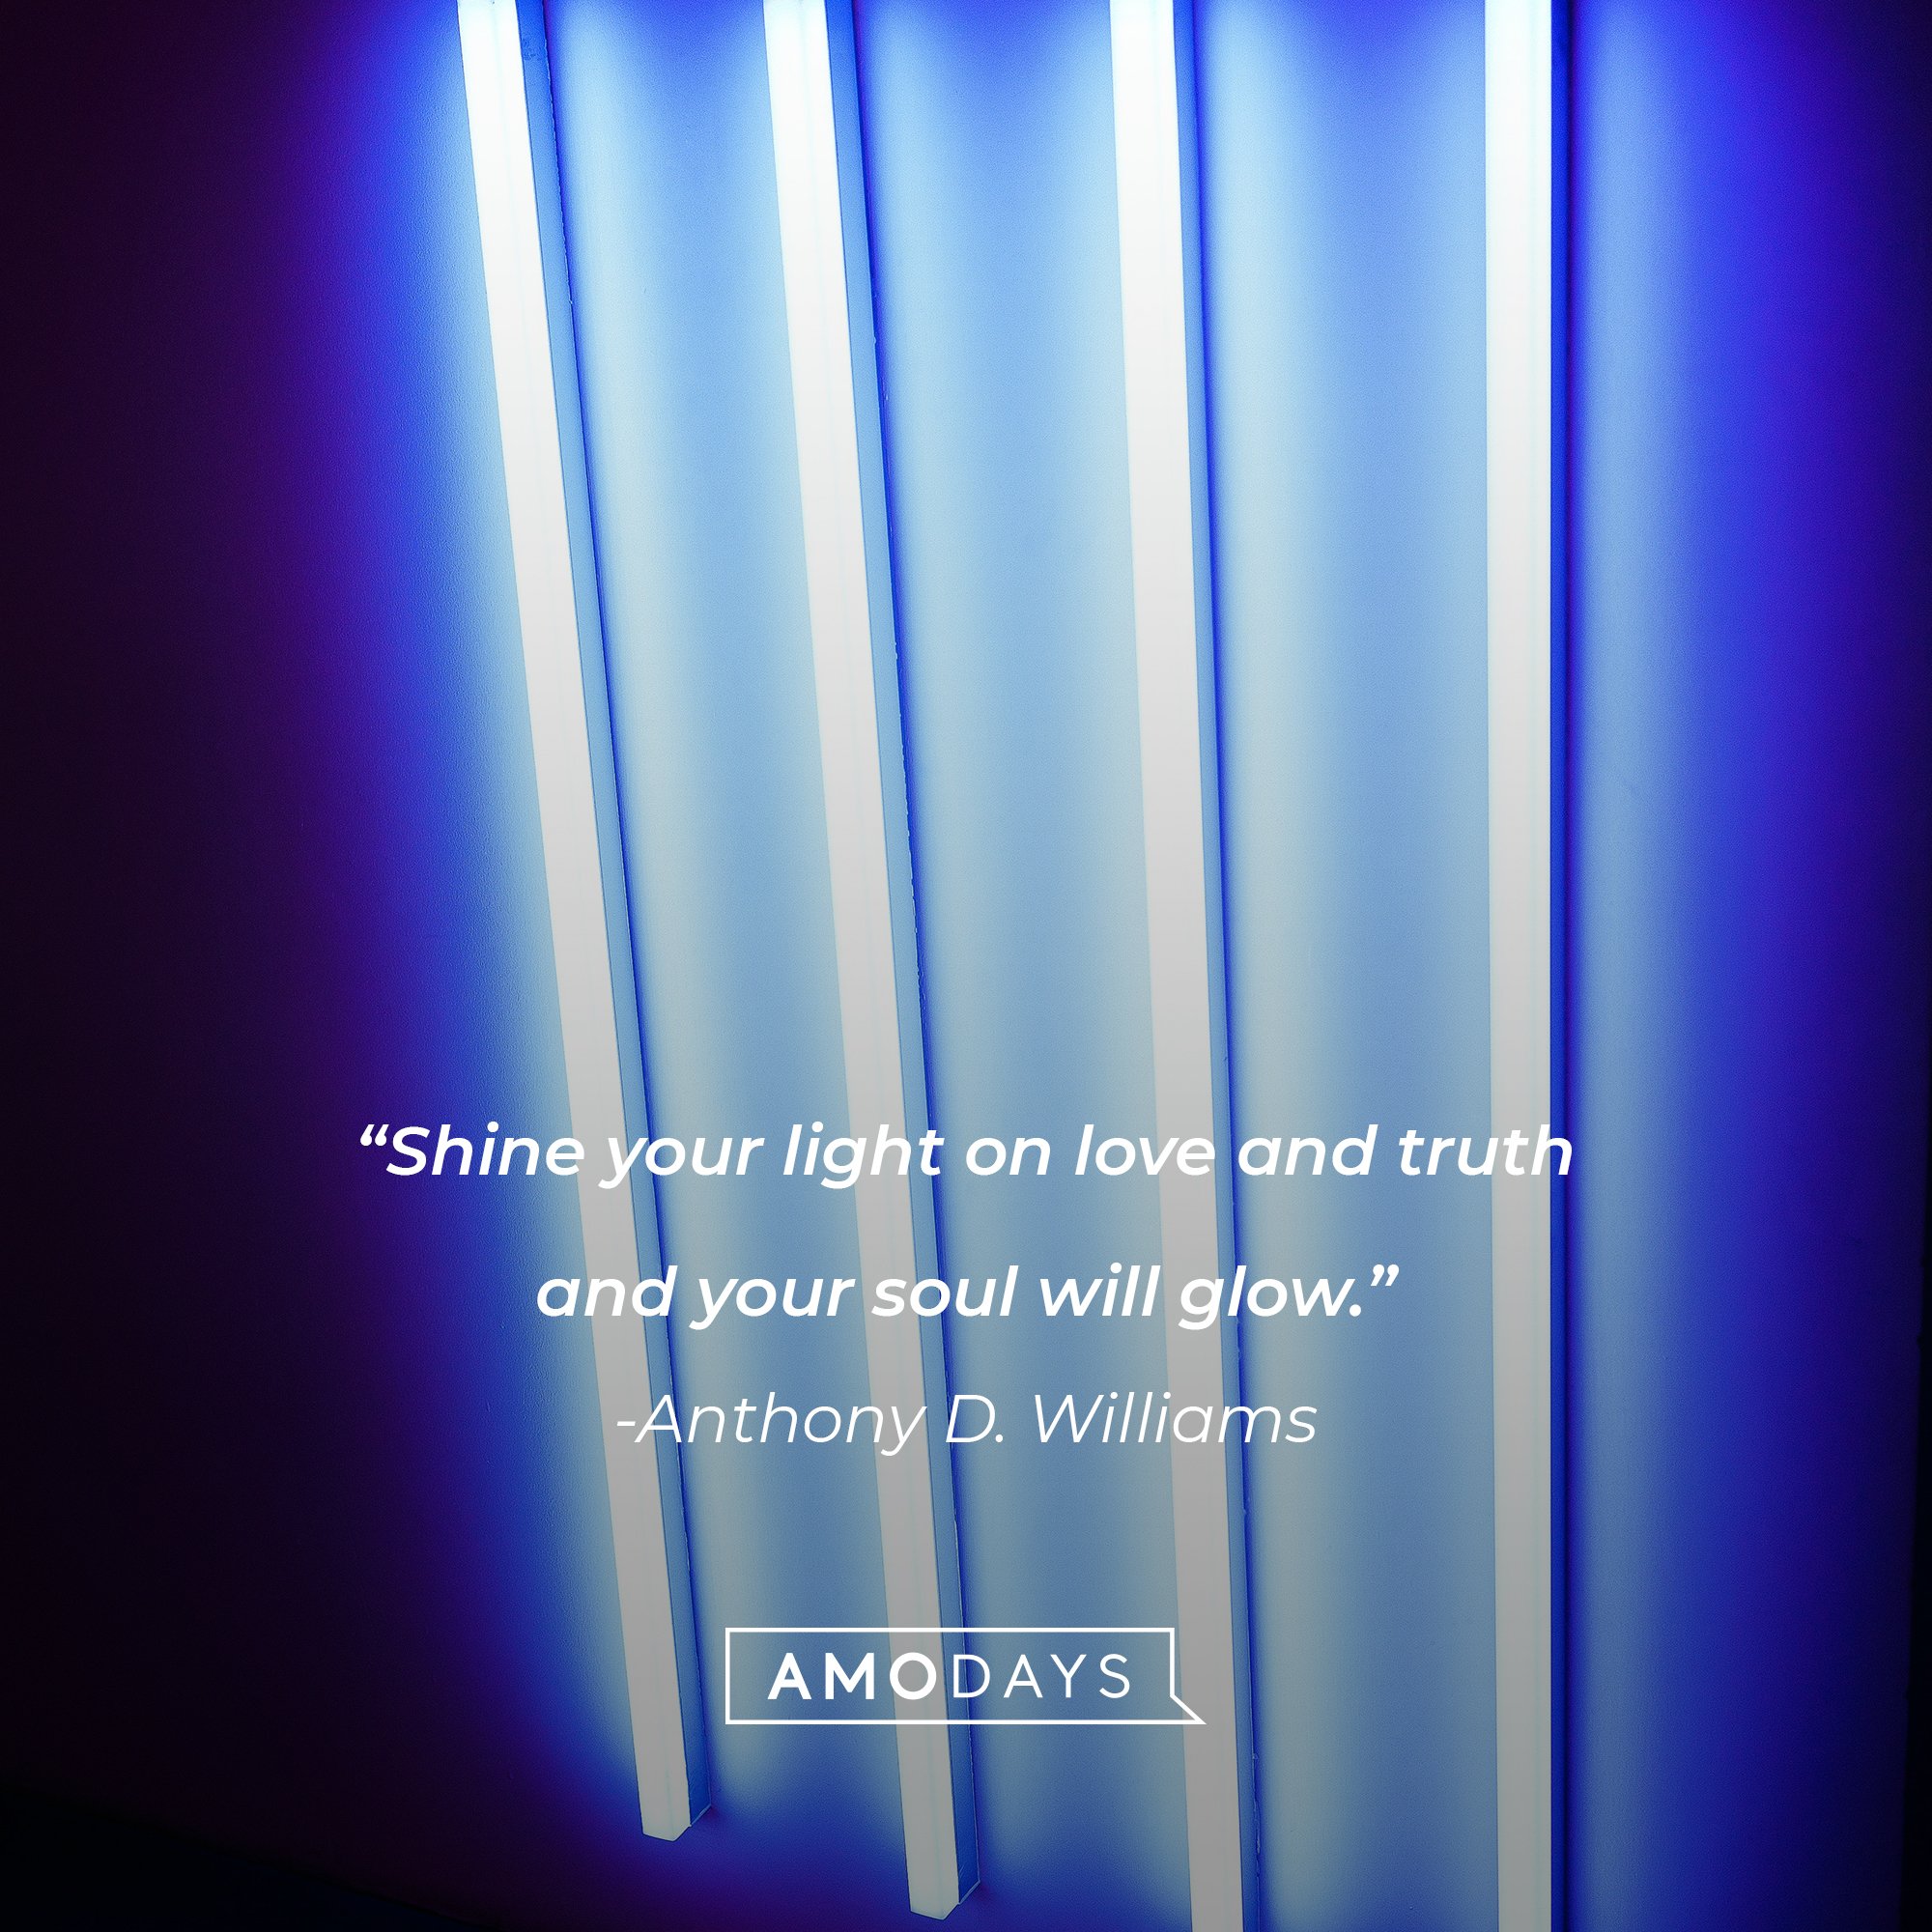 Anthony D. Williams's quote: "Shine your light on love and truth and your soul will glow." | Image: AmoDays